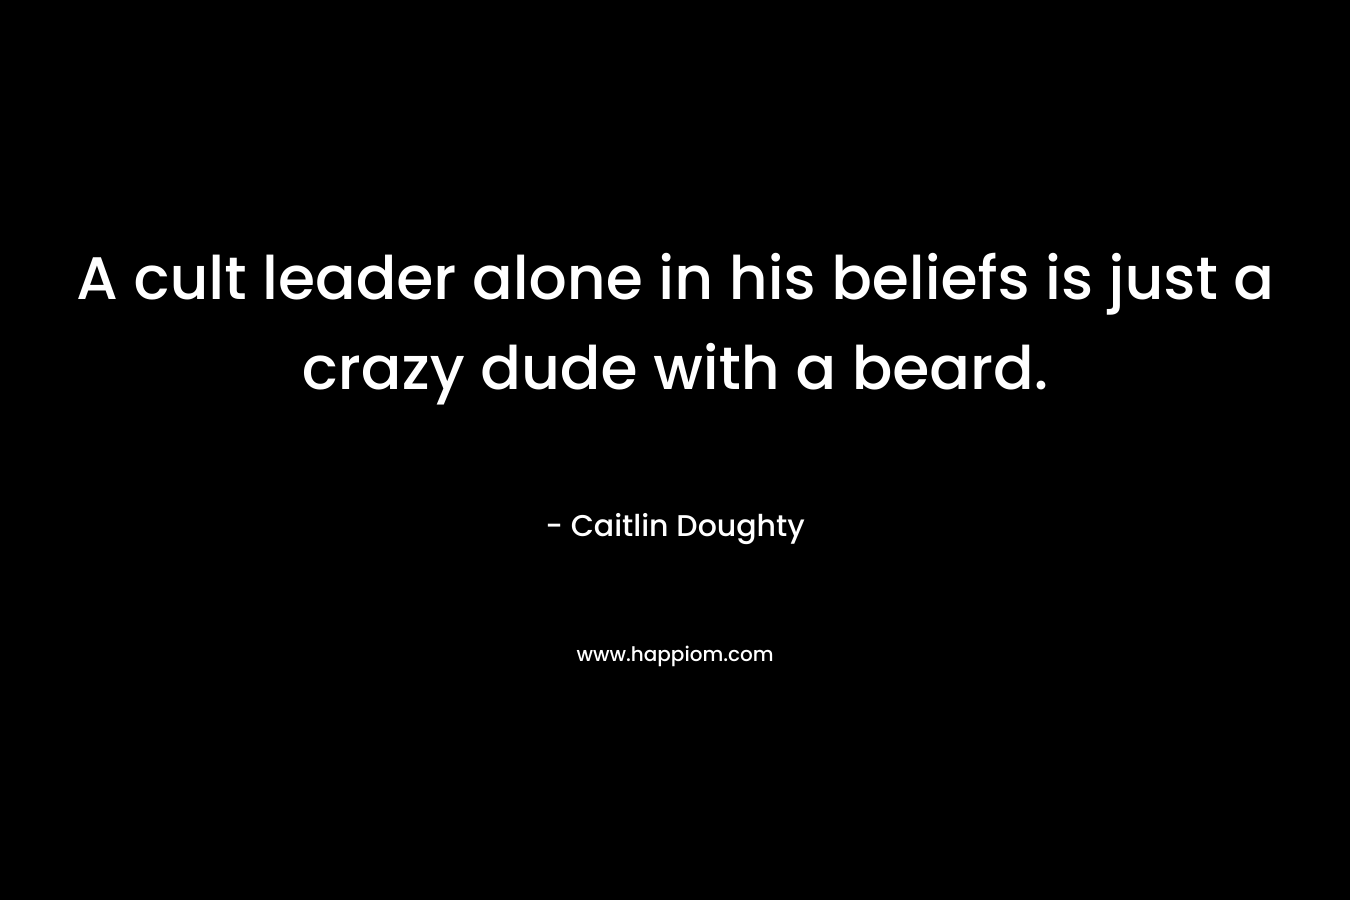 A cult leader alone in his beliefs is just a crazy dude with a beard.